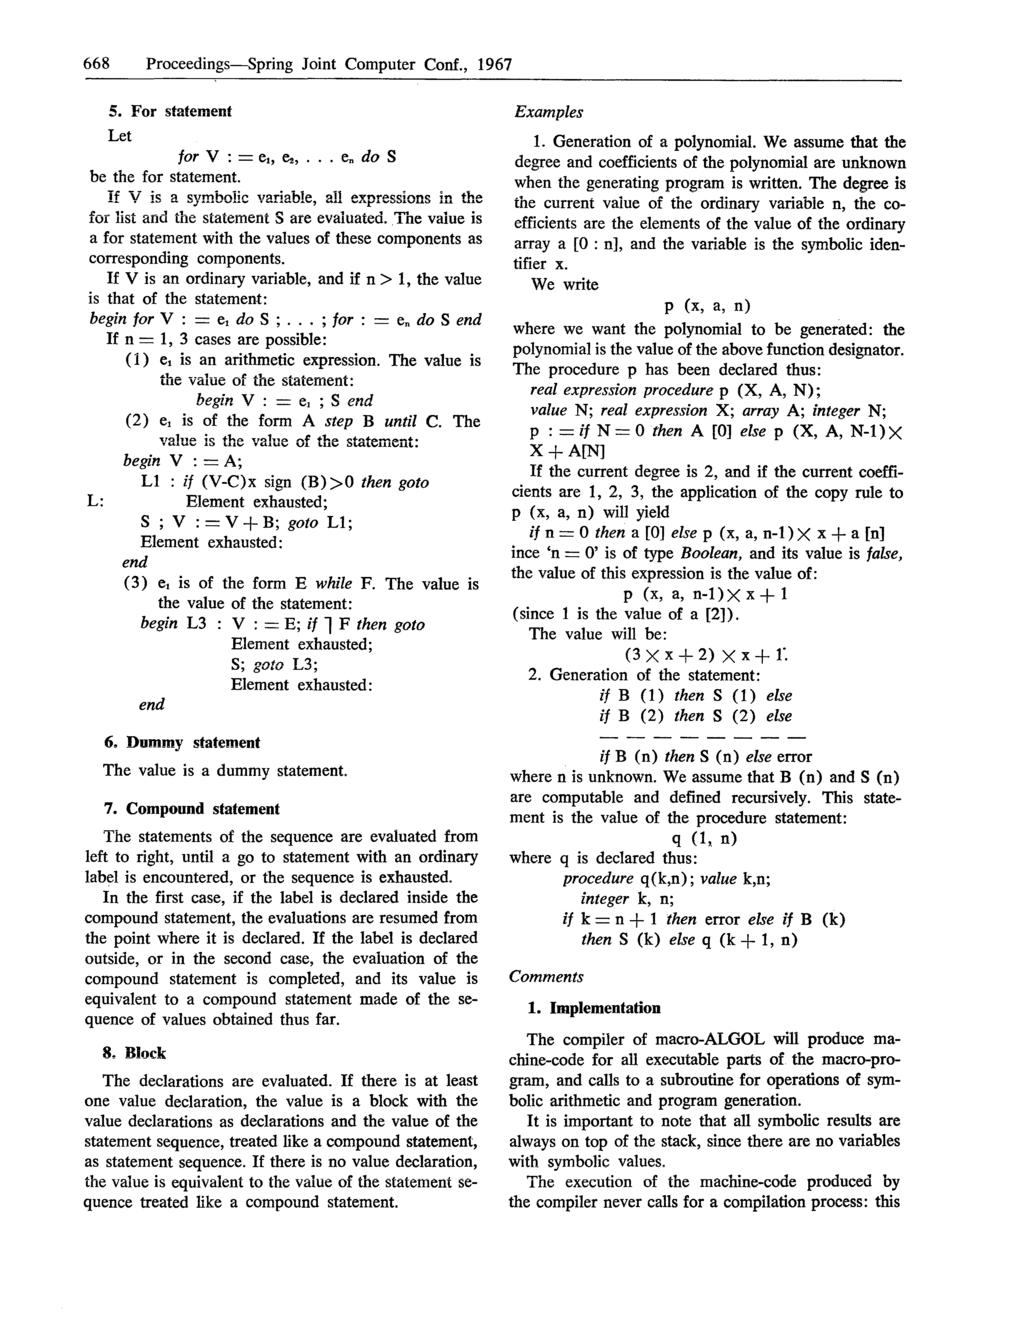 668 Proceedings-Spring Joint Computer Conf., 1967 5. For statement Let for V : == el, e2,... en do S be the for statement.